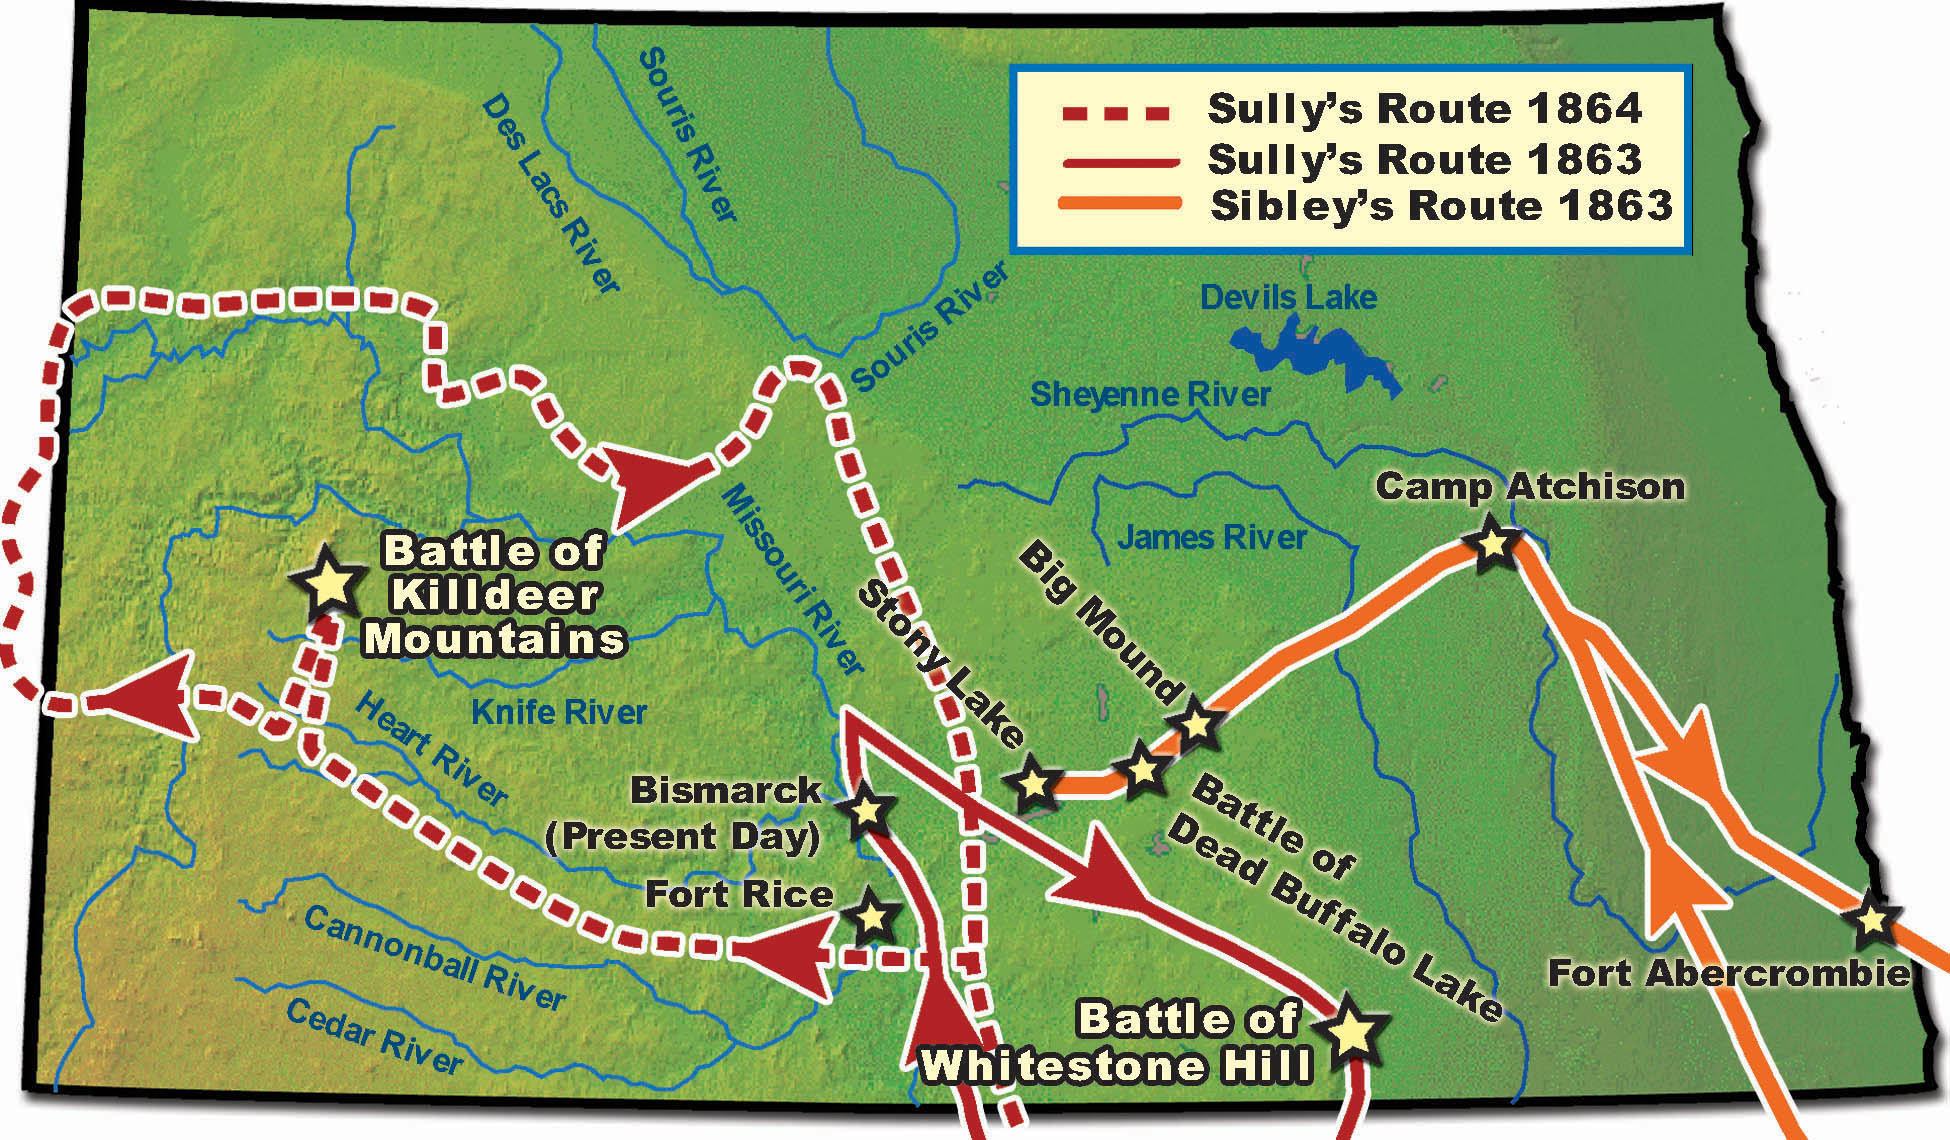 The routes of Sibley and Sully